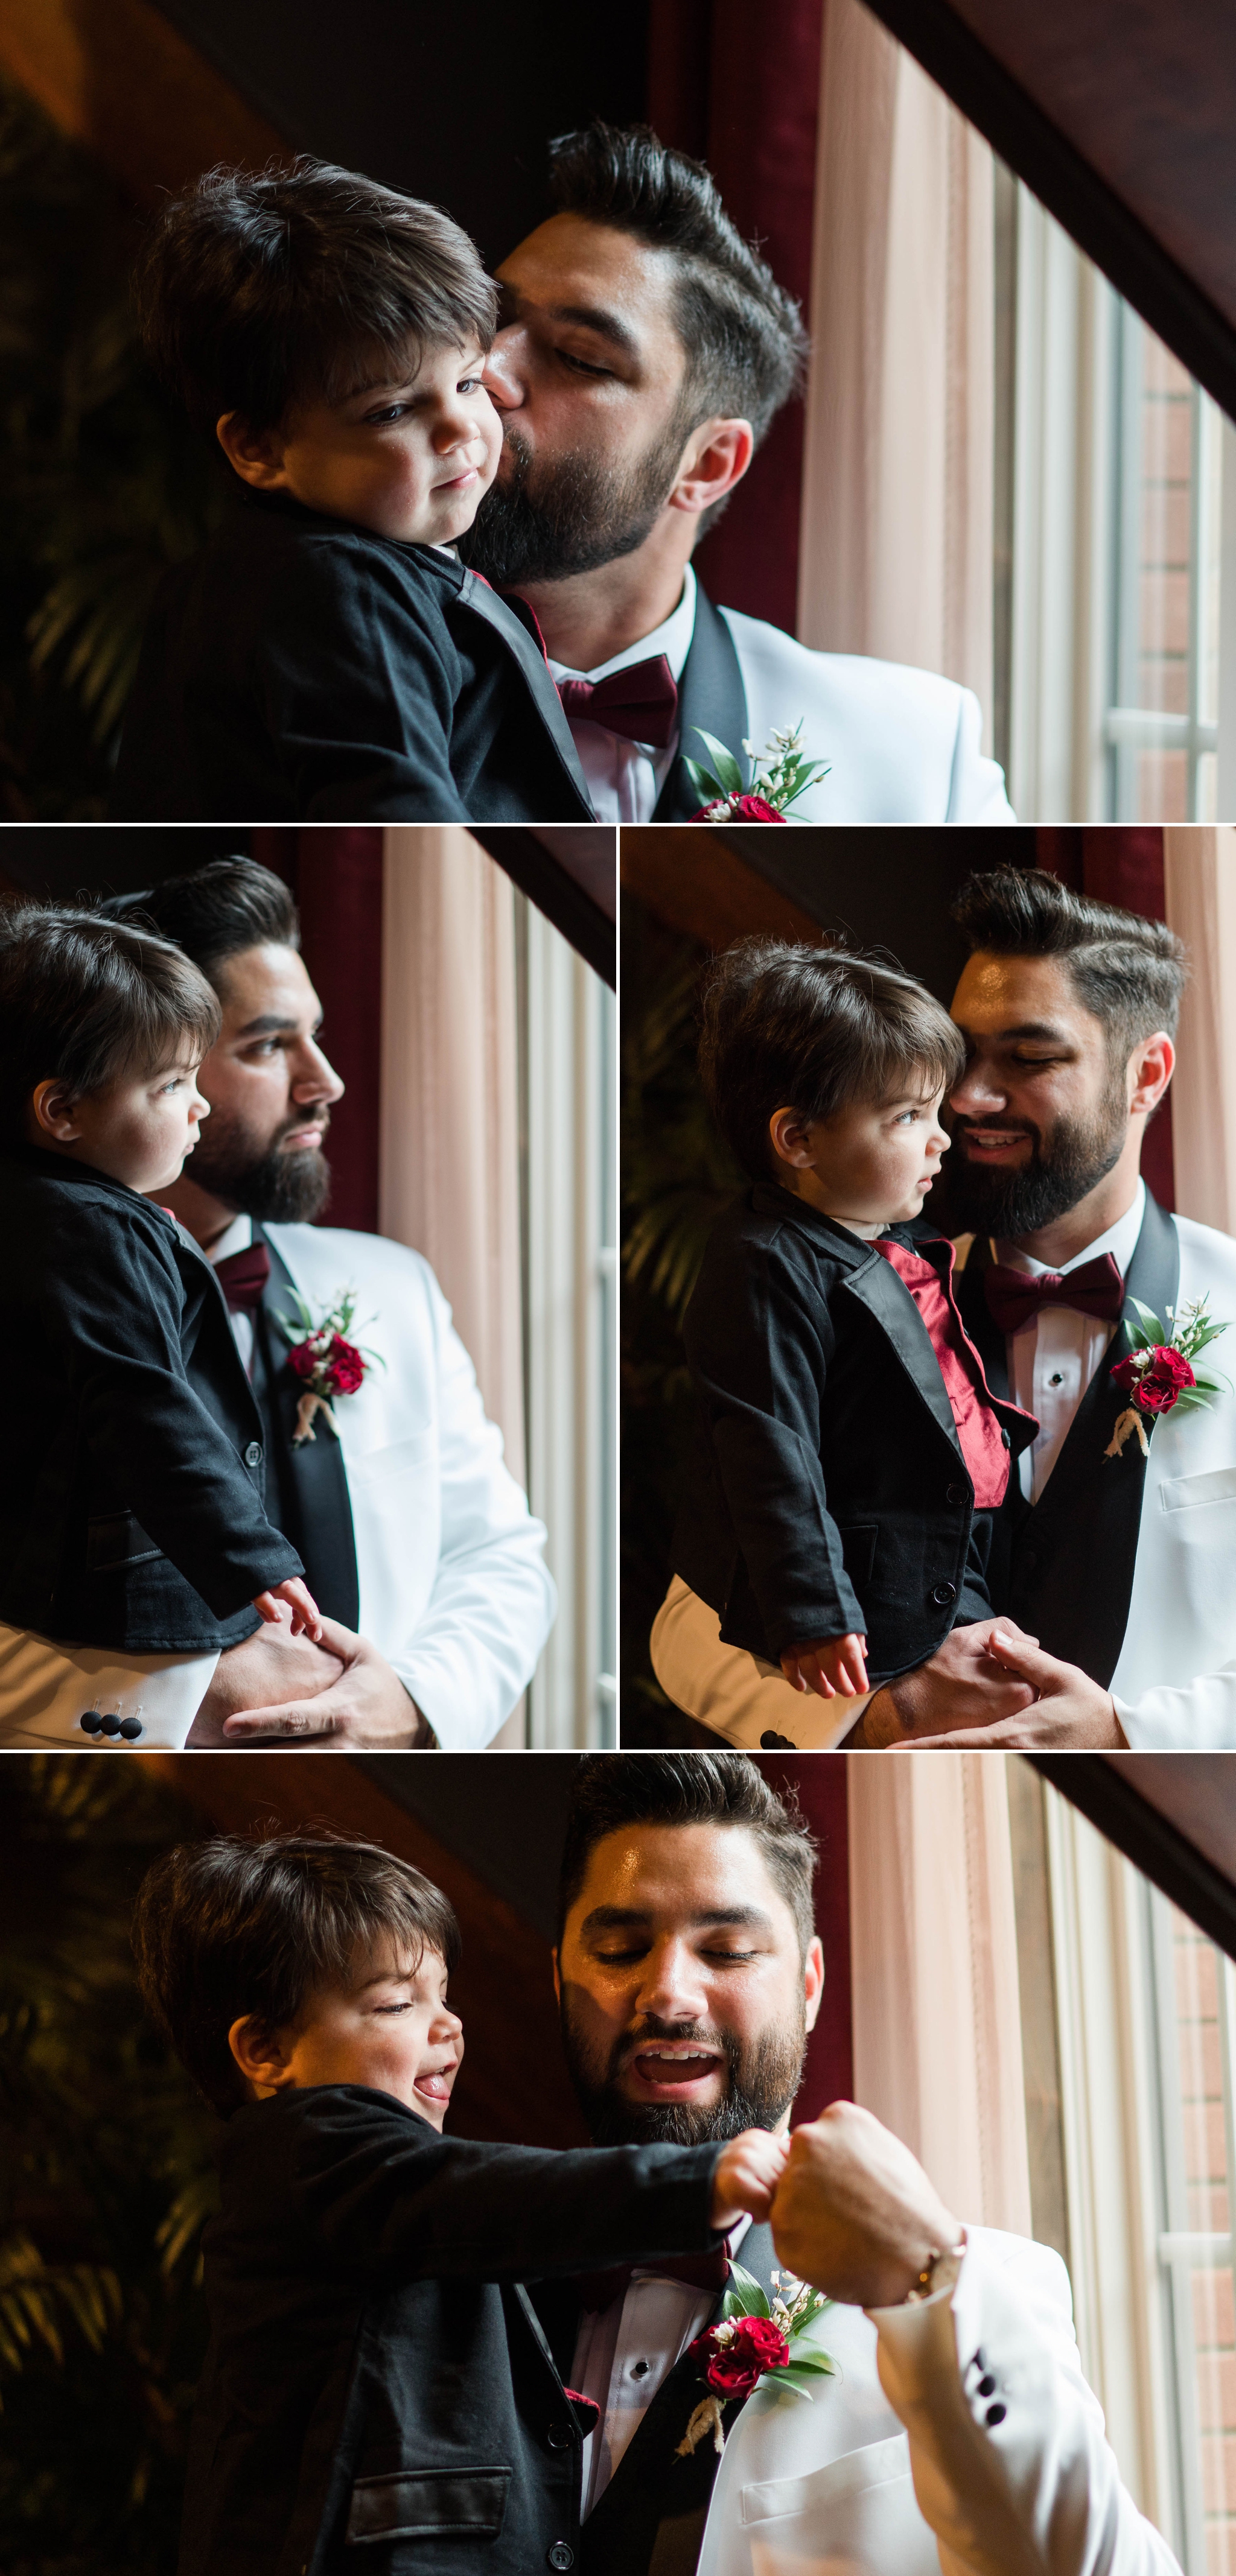 Groom spending quality time with his son before the ceremony - - Honolulu Oahu Hawaii Wedding Photographer